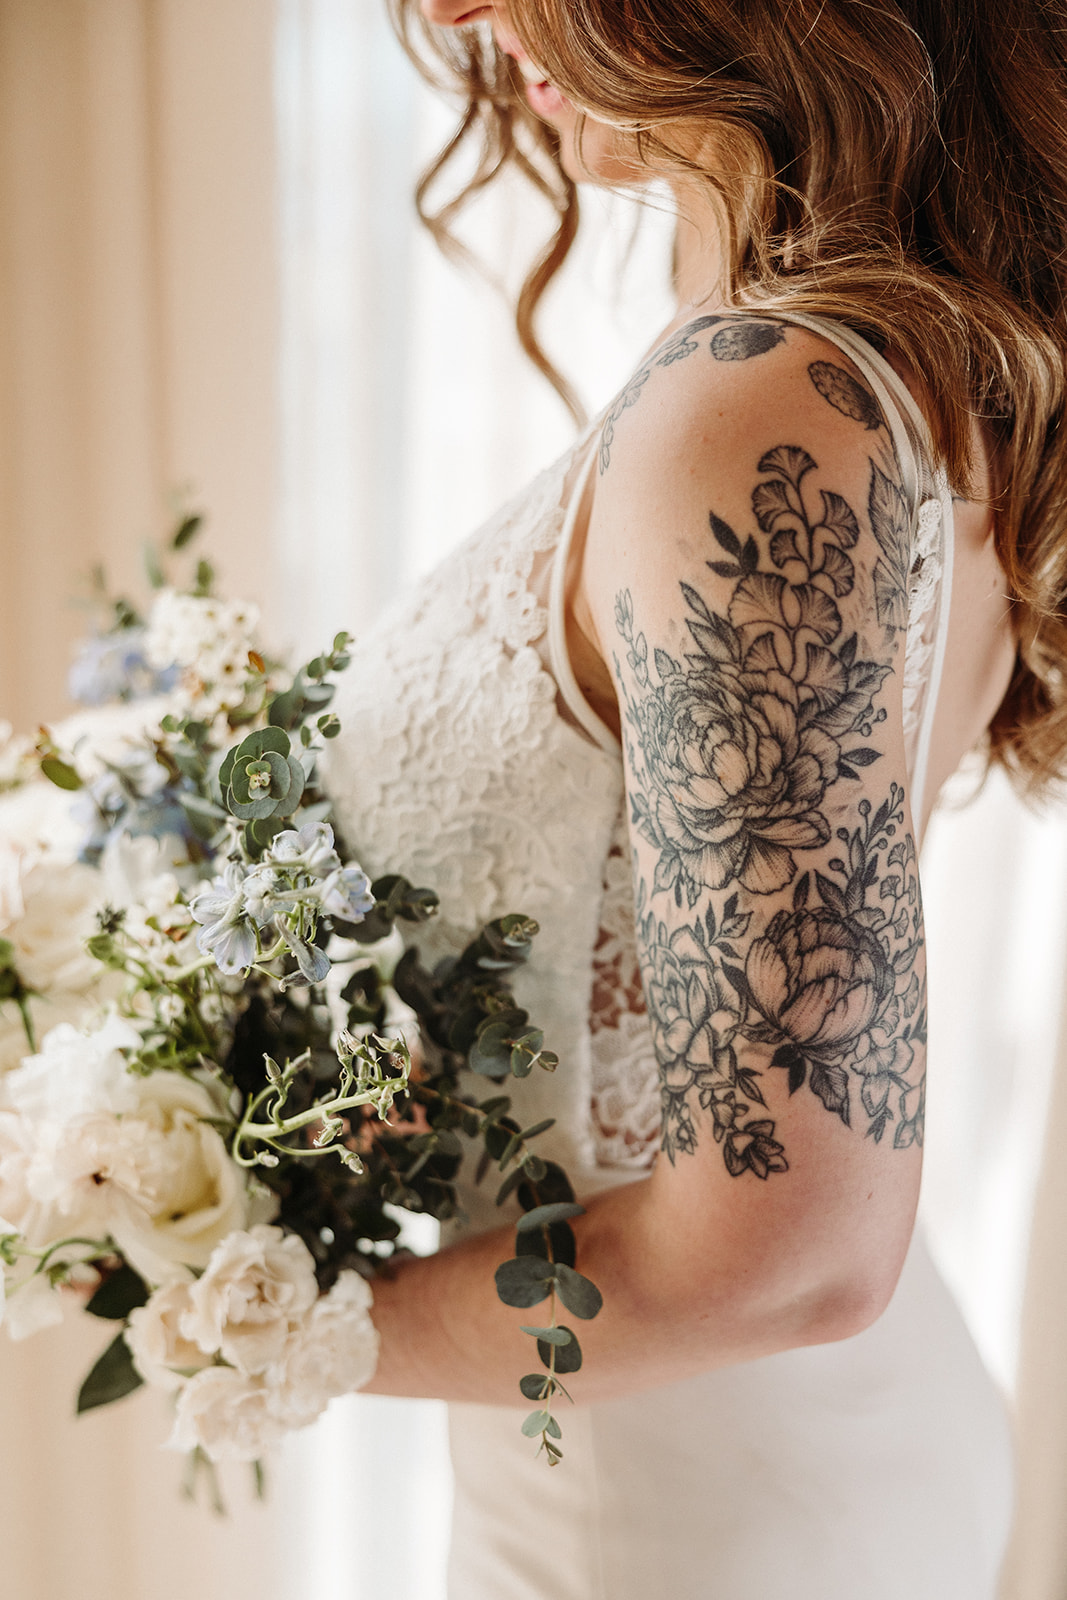 Bride portrait with her lace bodice wedding dress and wedding bouquet